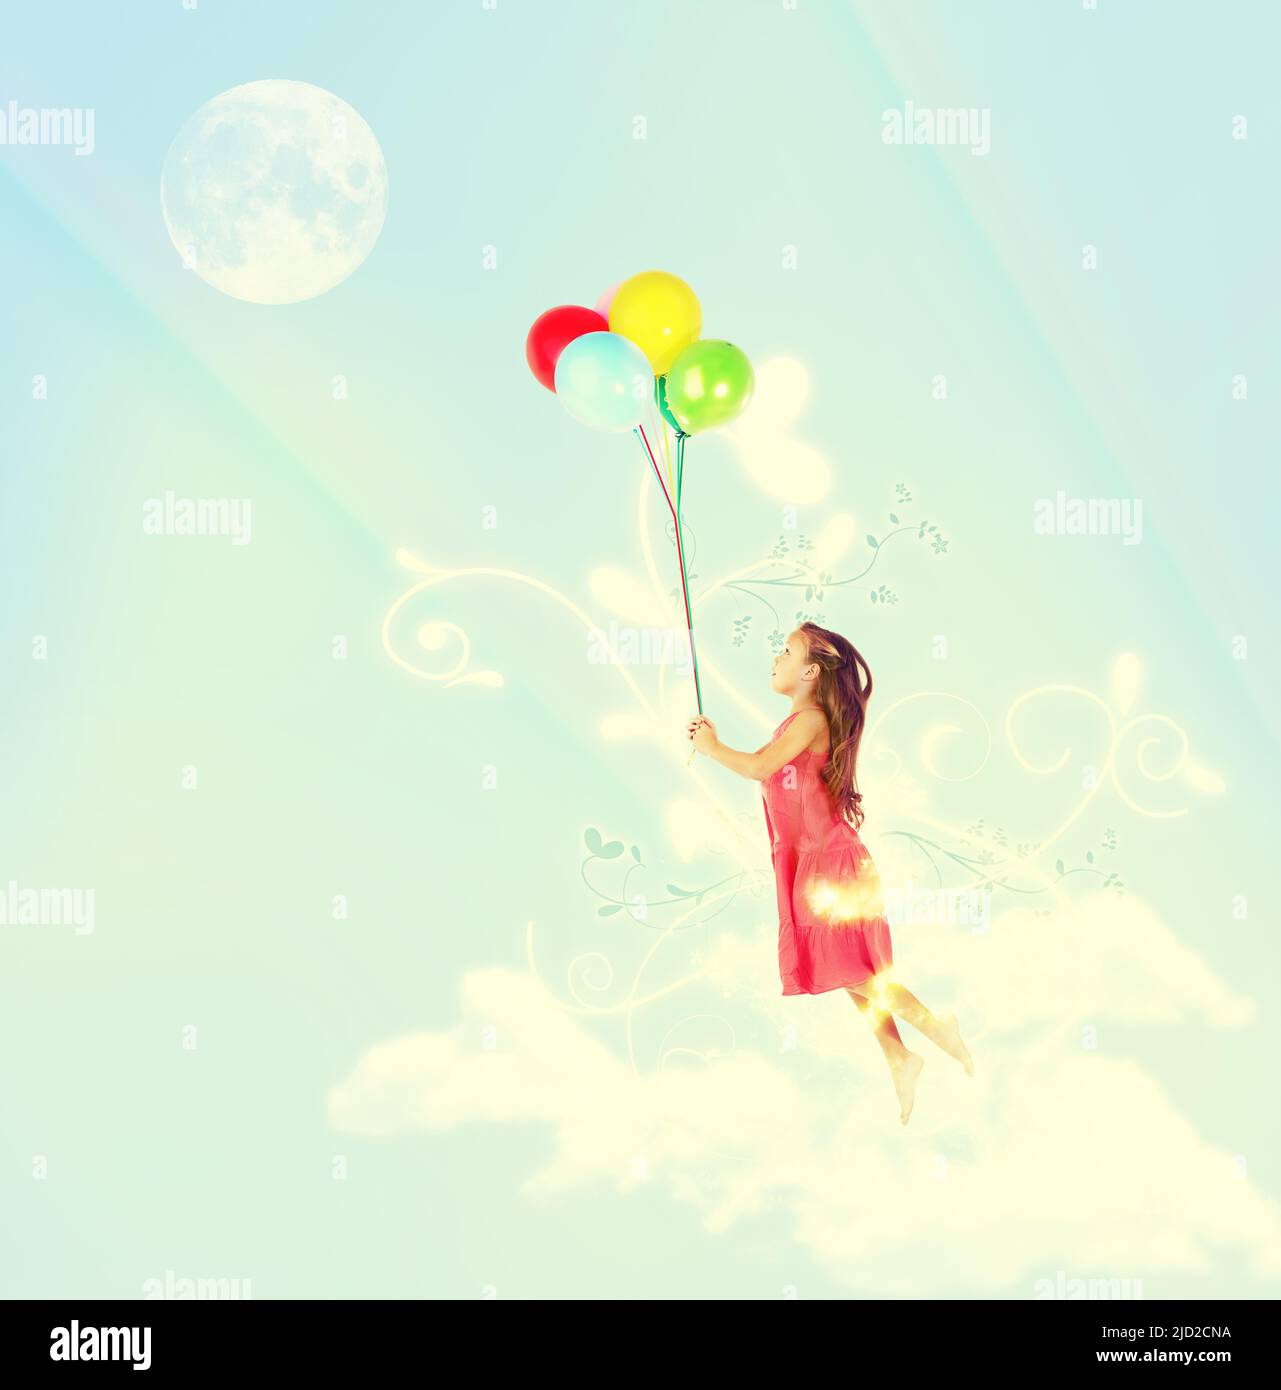 Floating away. A young girl being lifted in the air by a bunch of colorful balloons. Stock Photo